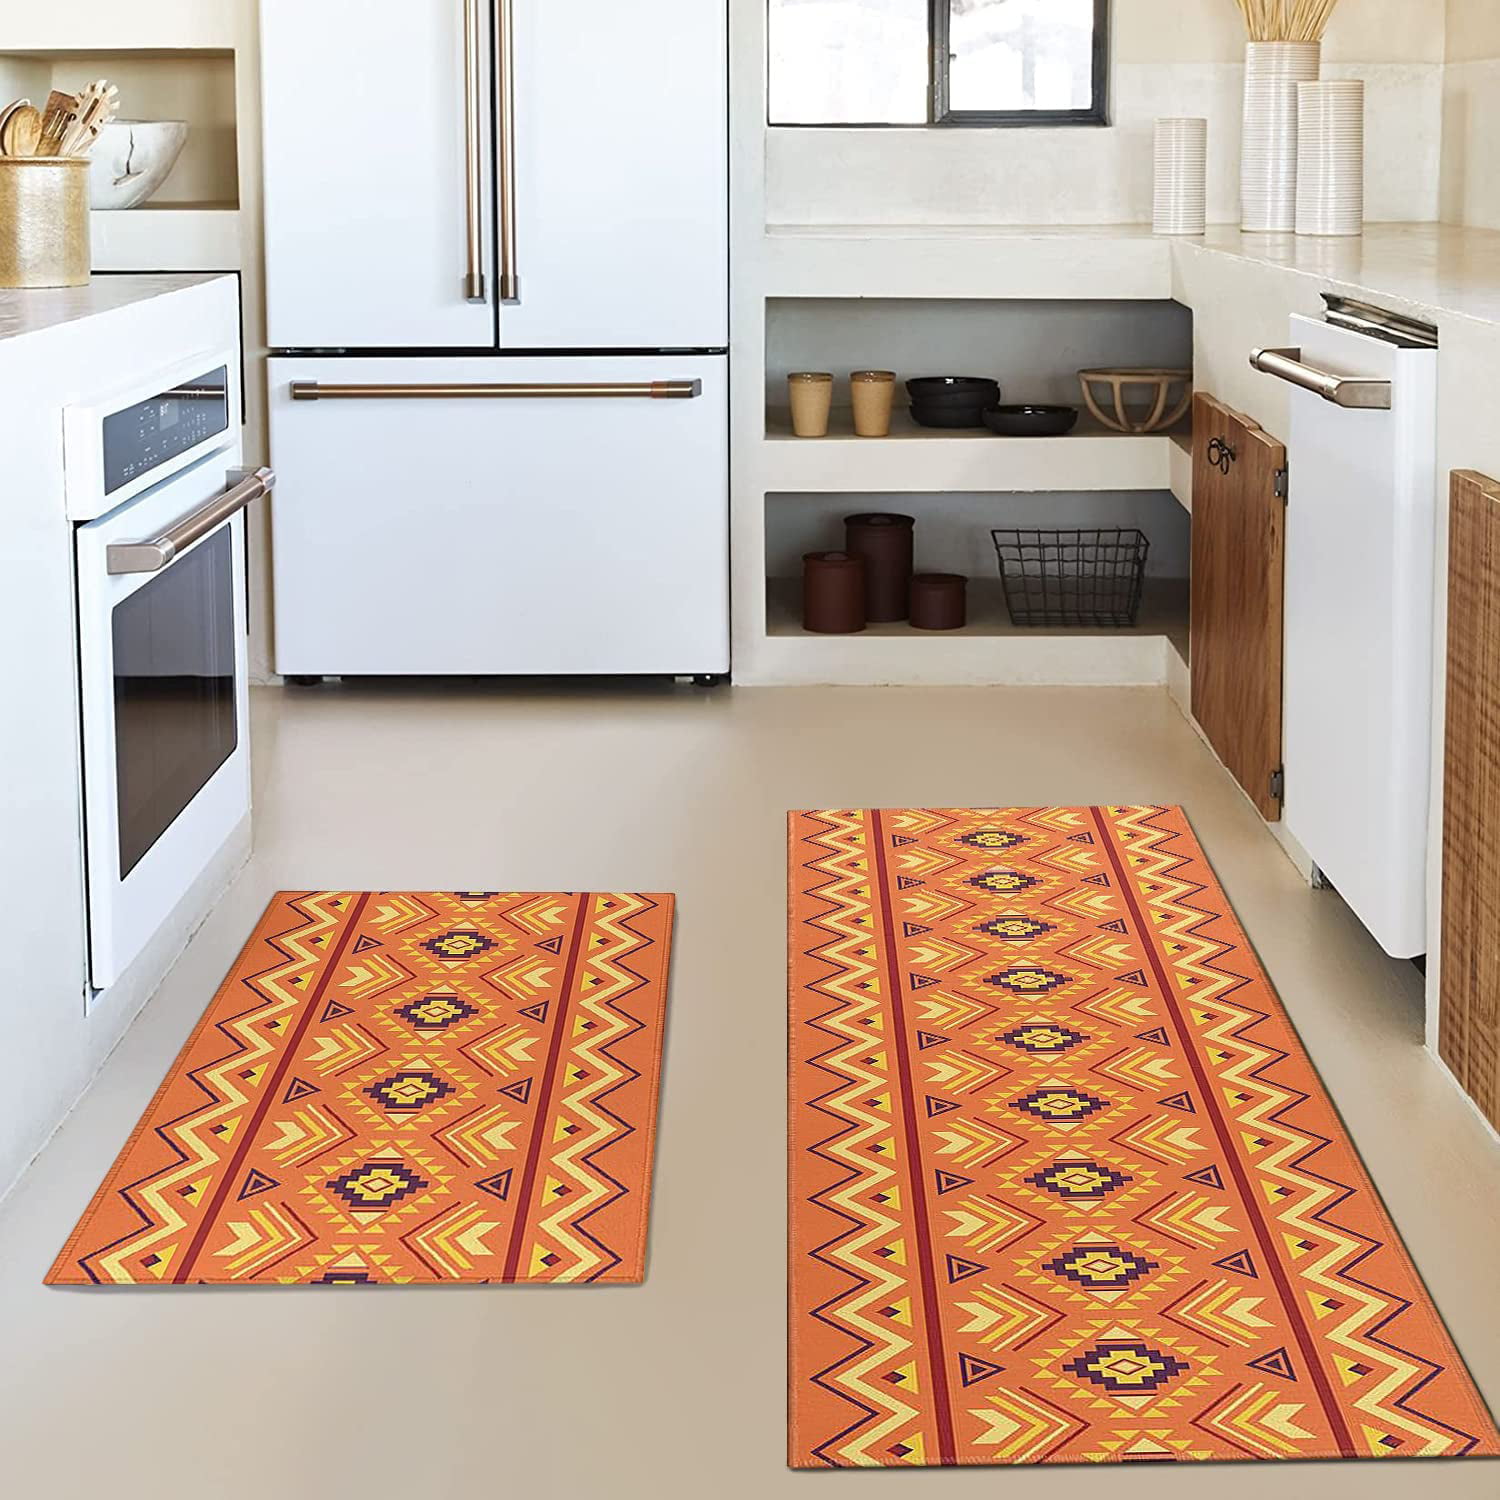 Debedcor Burnt Orange Kitchen Rugs and Mats Set of 2, Non-Skid Bathroom  Rugs Vintage Farmhouse Oil Painting Abstract Art Washable Kitchen Runner  Floor